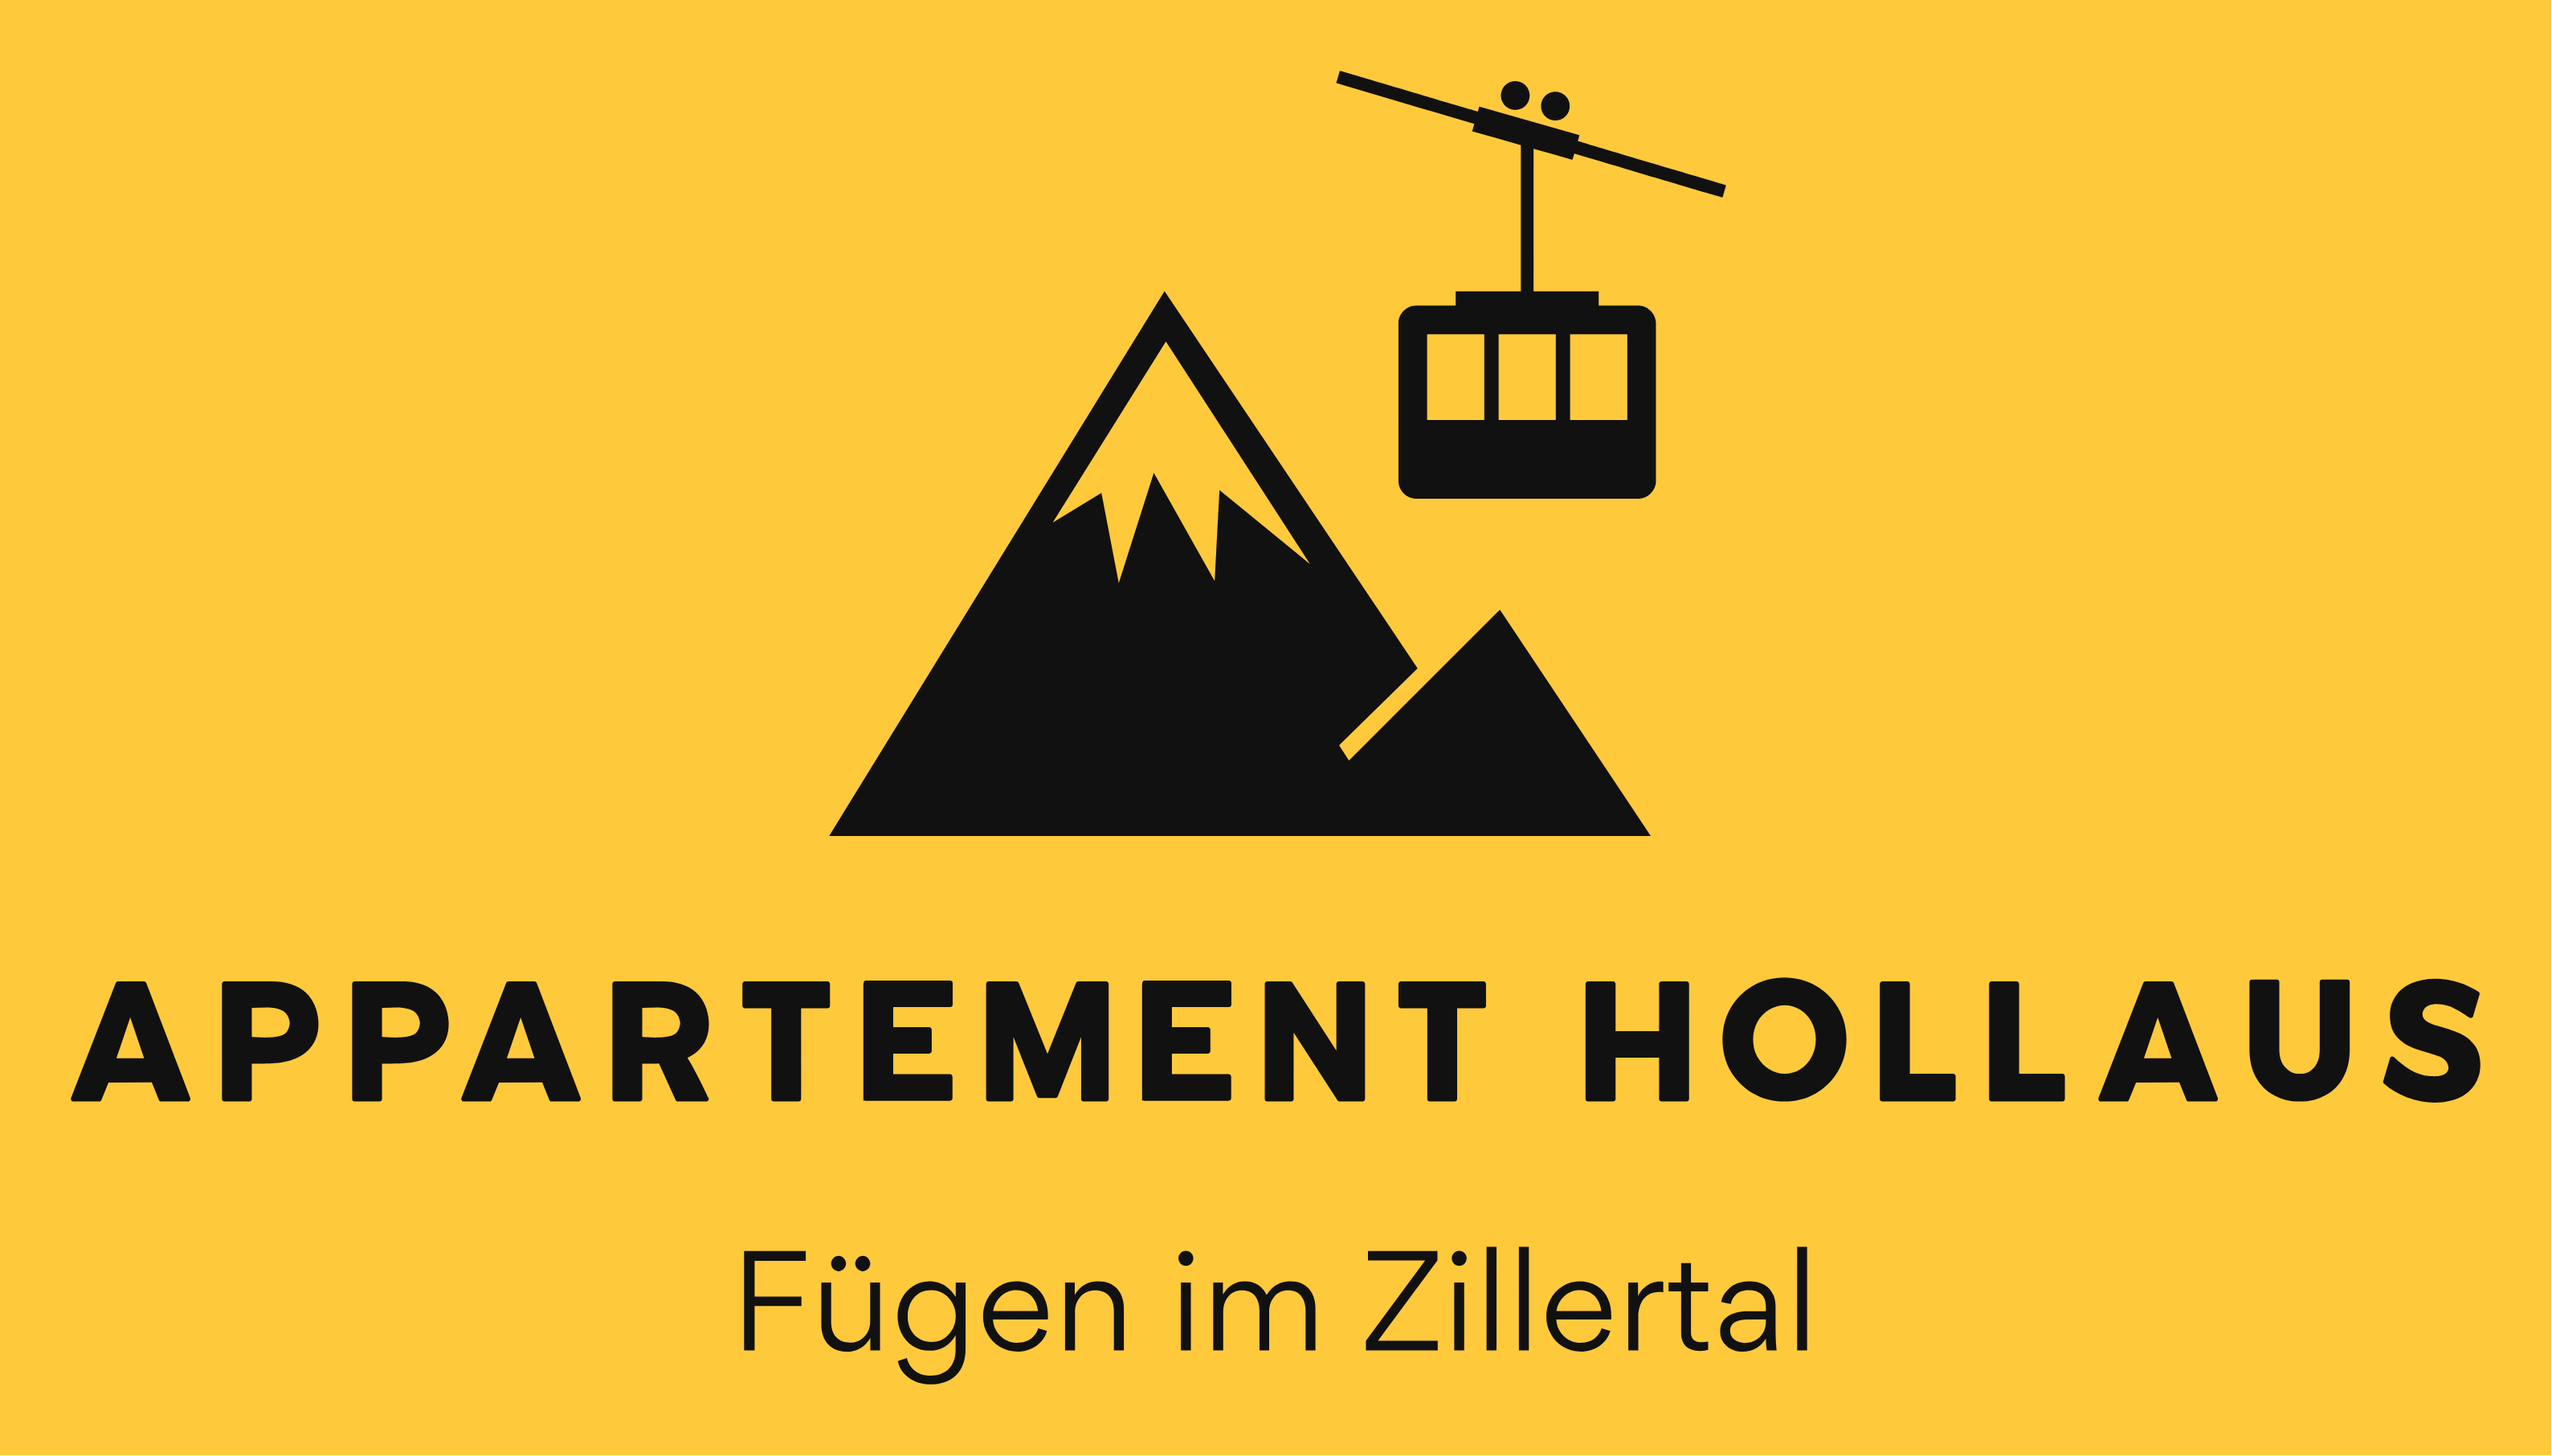 (c) Appartement-hollaus.at